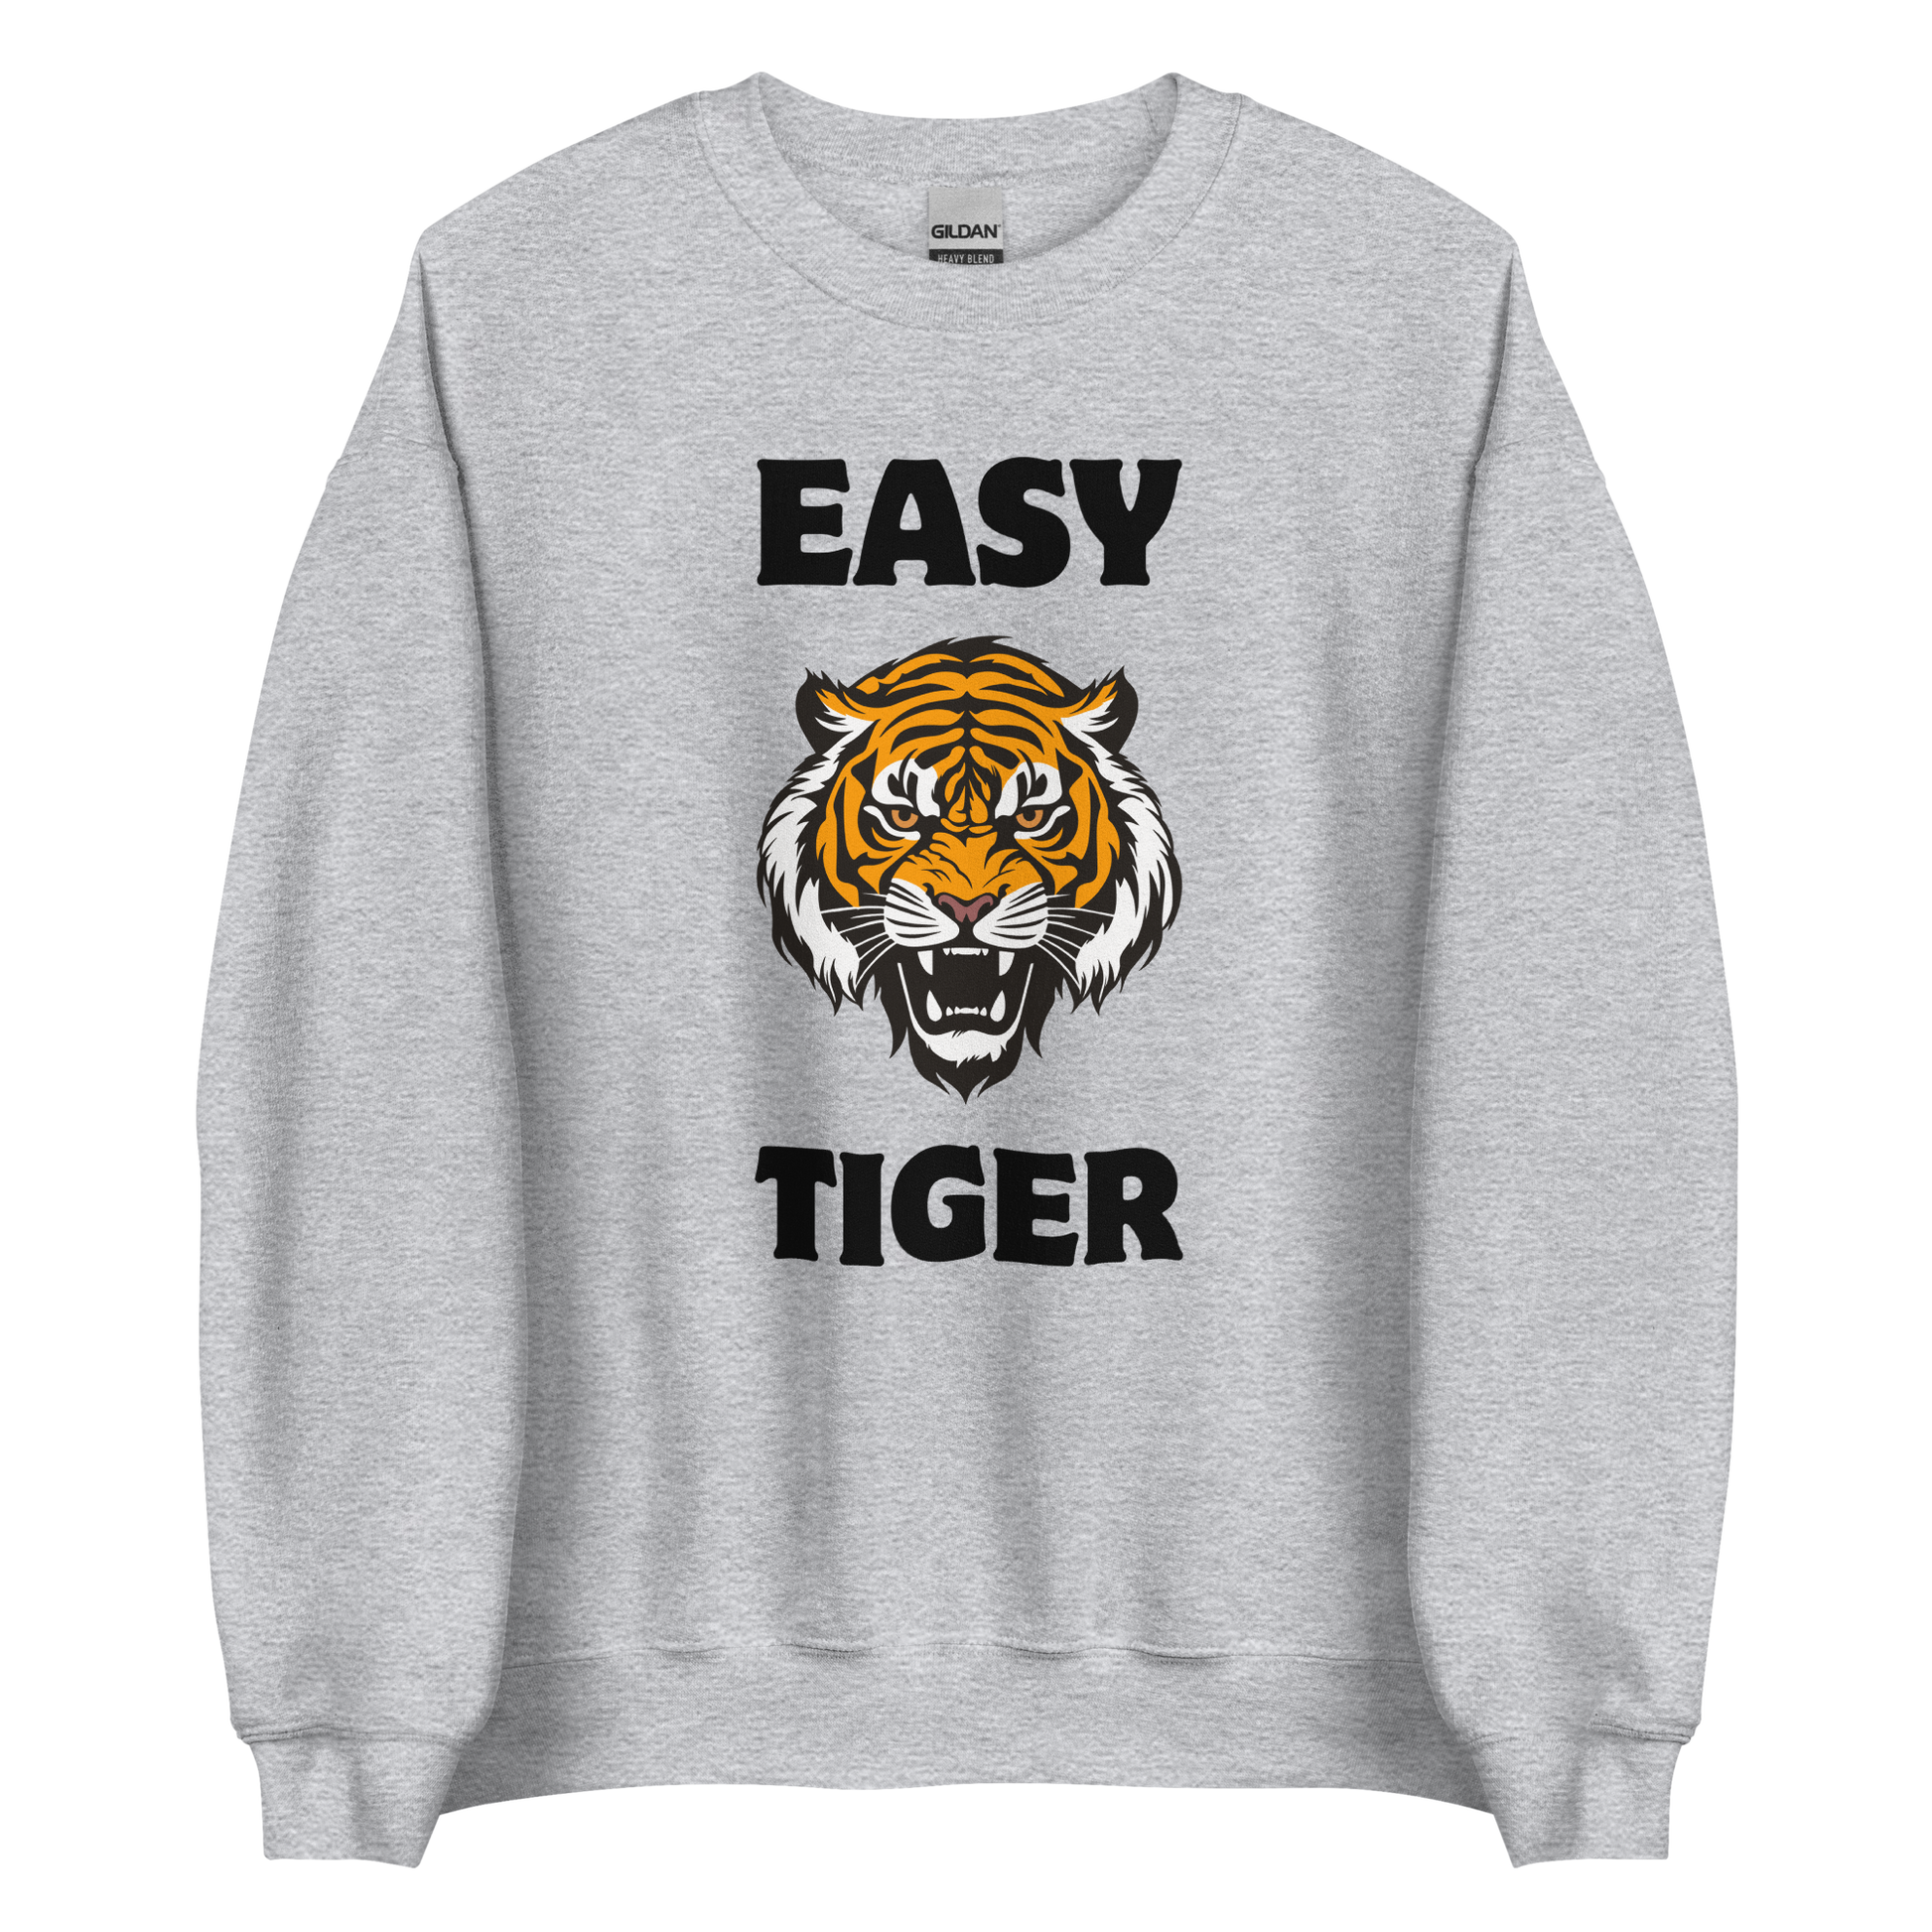 Sport Grey Tiger Sweatshirt featuring a Easy Tiger graphic on the chest - Funny Graphic Tiger Sweatshirts - Boozy Fox